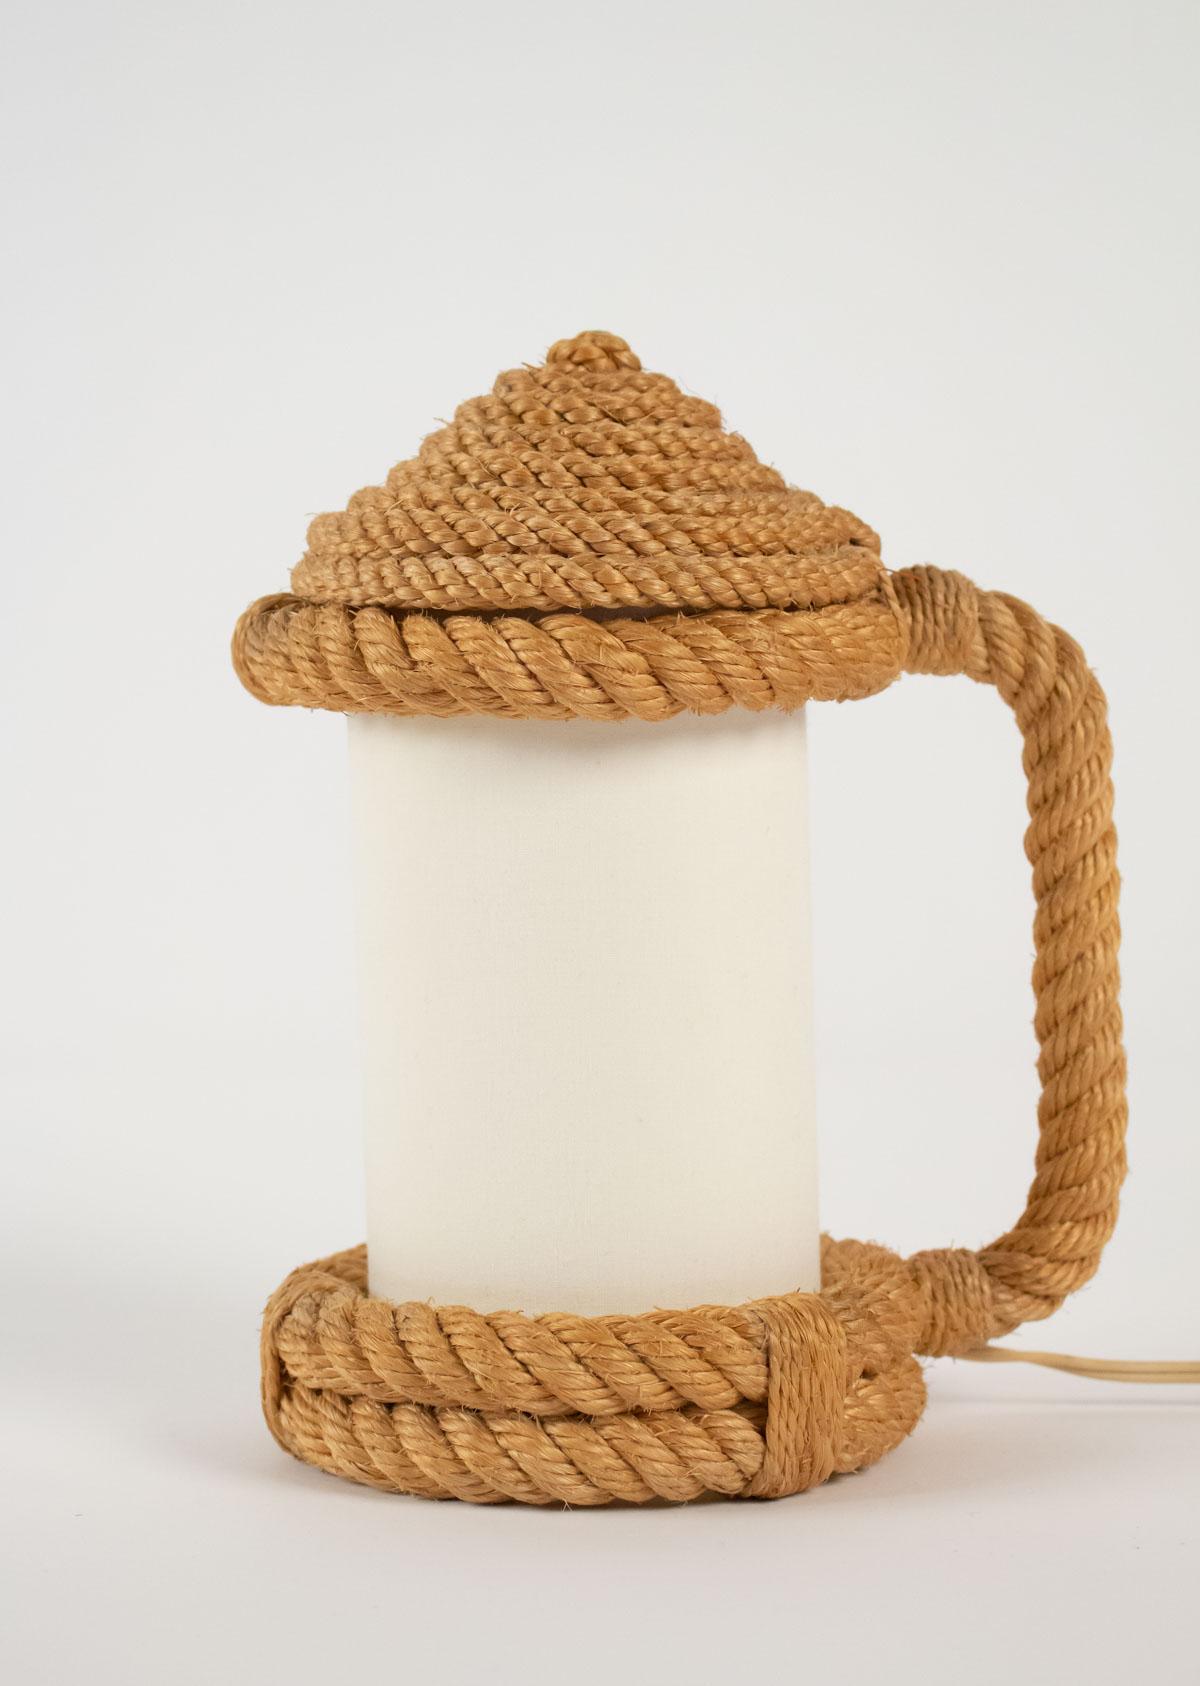 Nice pair of table lanterns made of rope.
Cylindrical shade made of off-white cotton granted to the originals.
One bulb per lamp.

Adrien Audoux and Frida Minet are known for their rope lights and furniture. Their first workshop have been